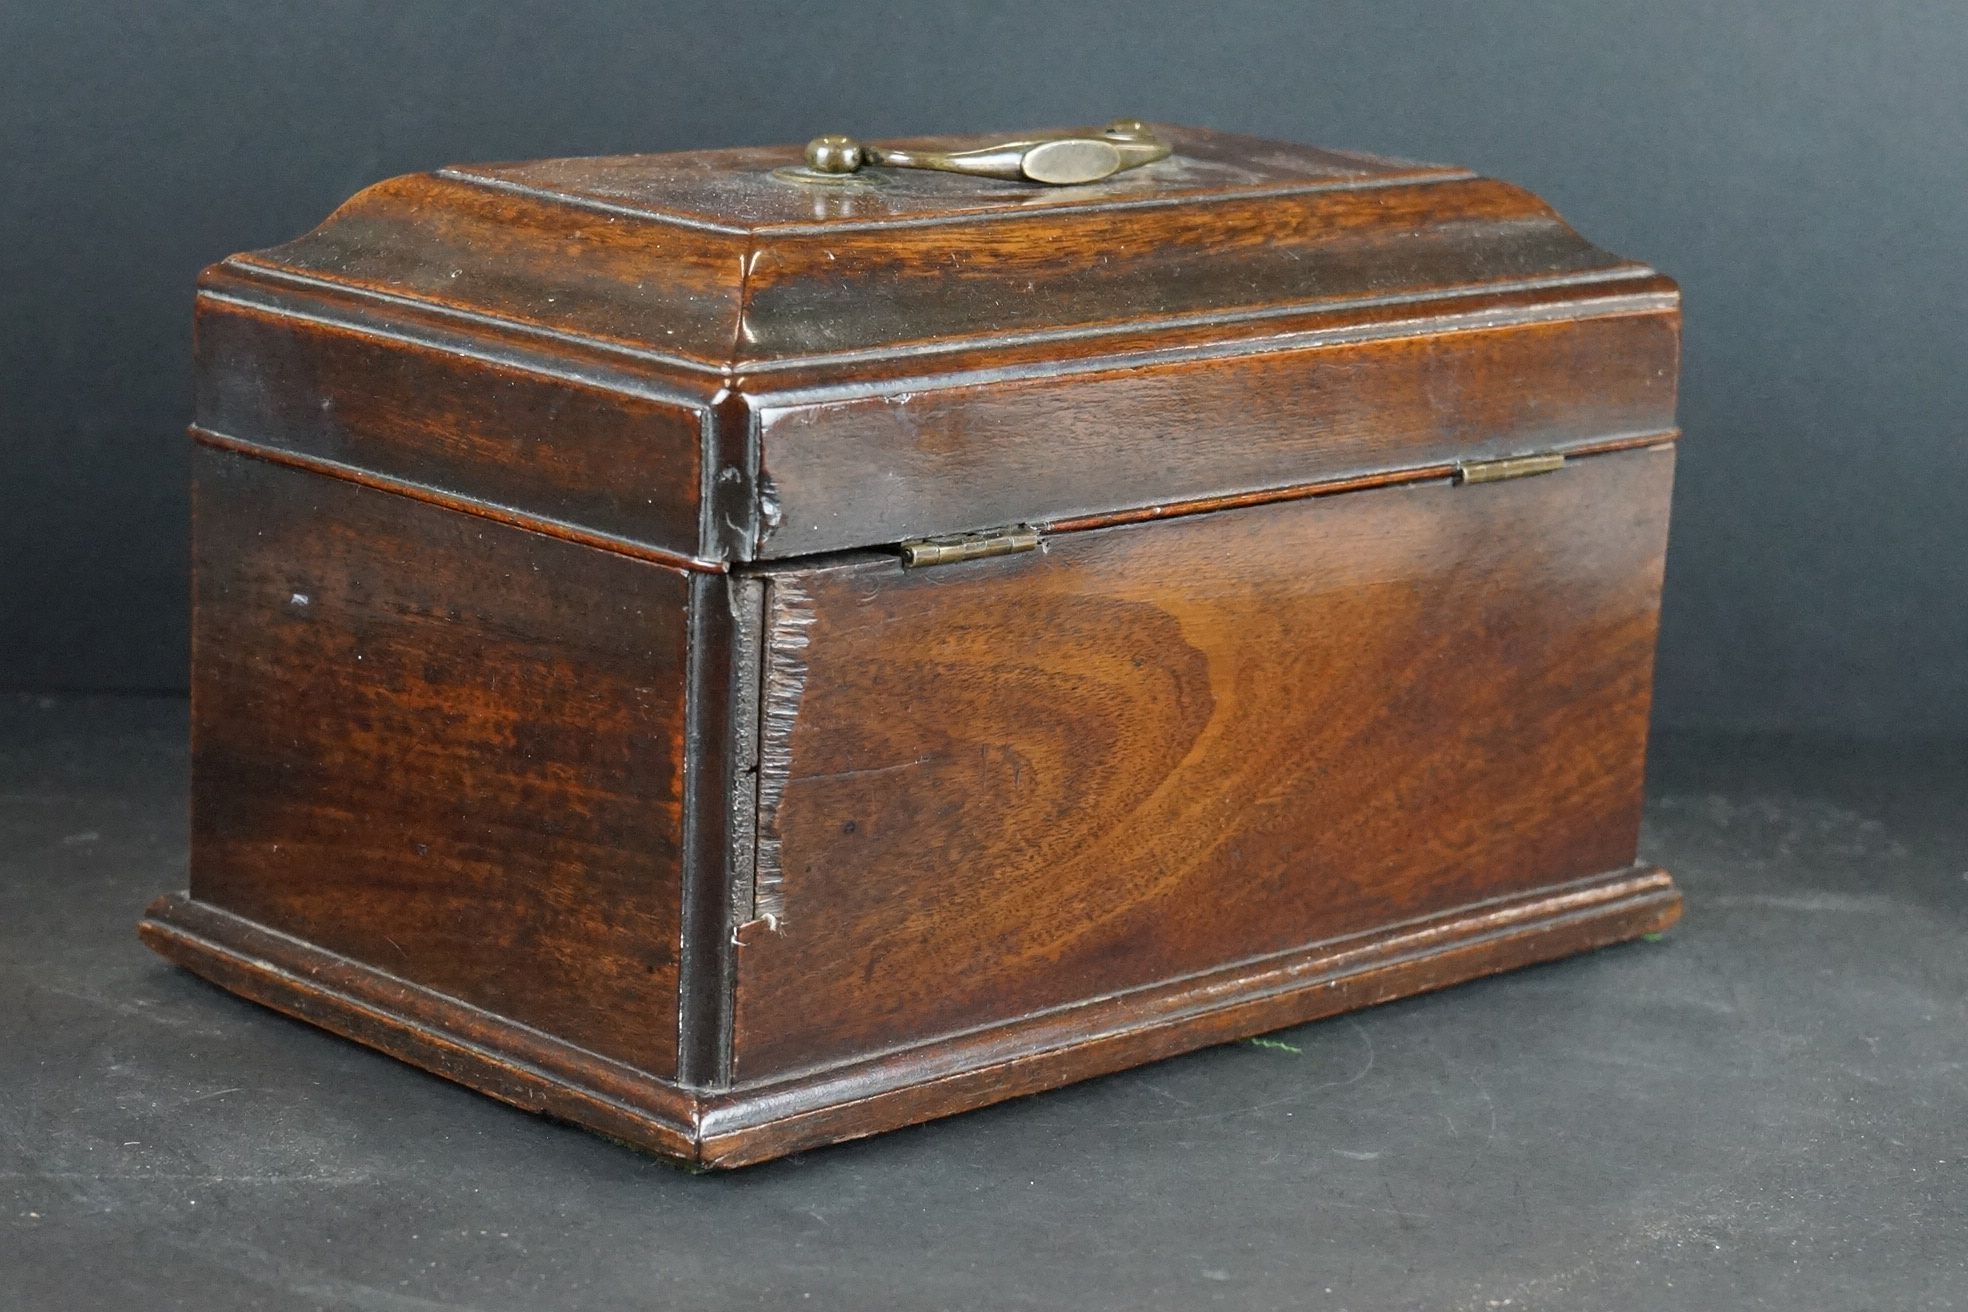 An antique wooden lidded box with brass fittings - Image 7 of 7